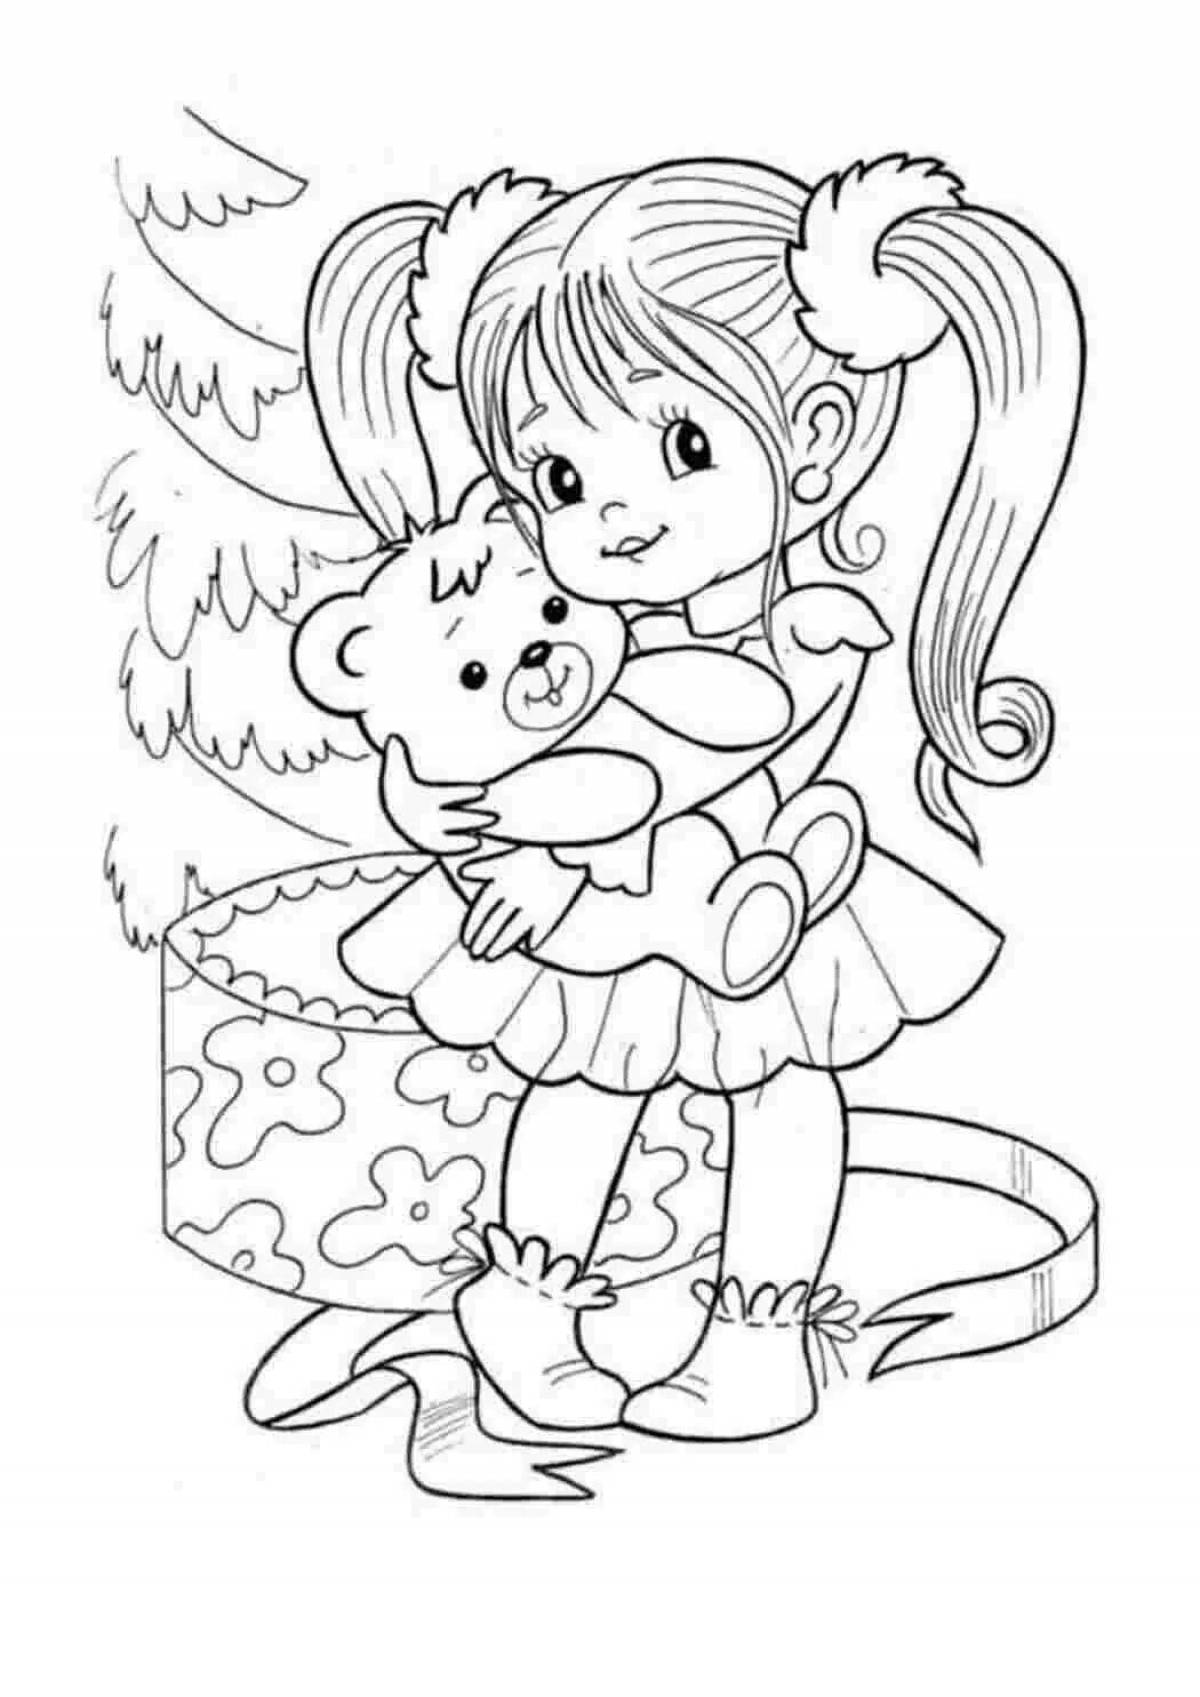 Charming Yandex coloring book for girls